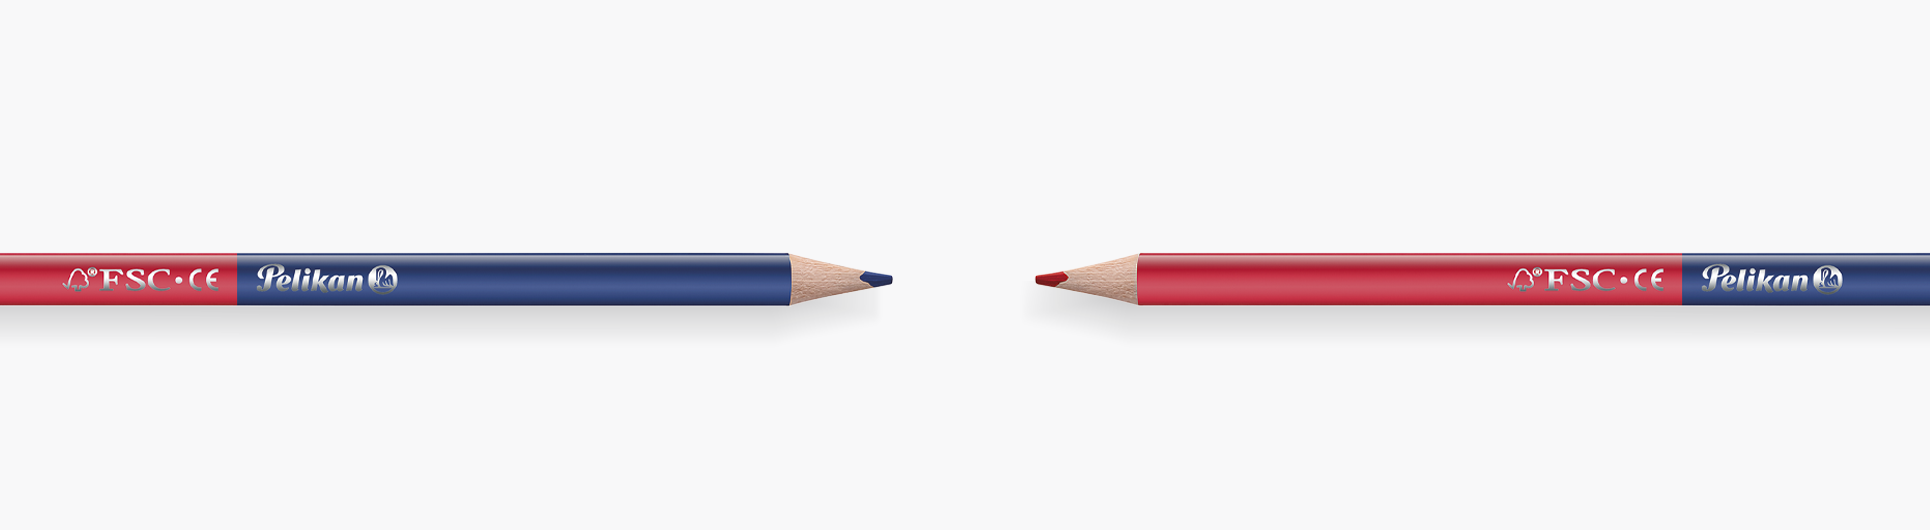 Thick colored pencils red & blue triangular